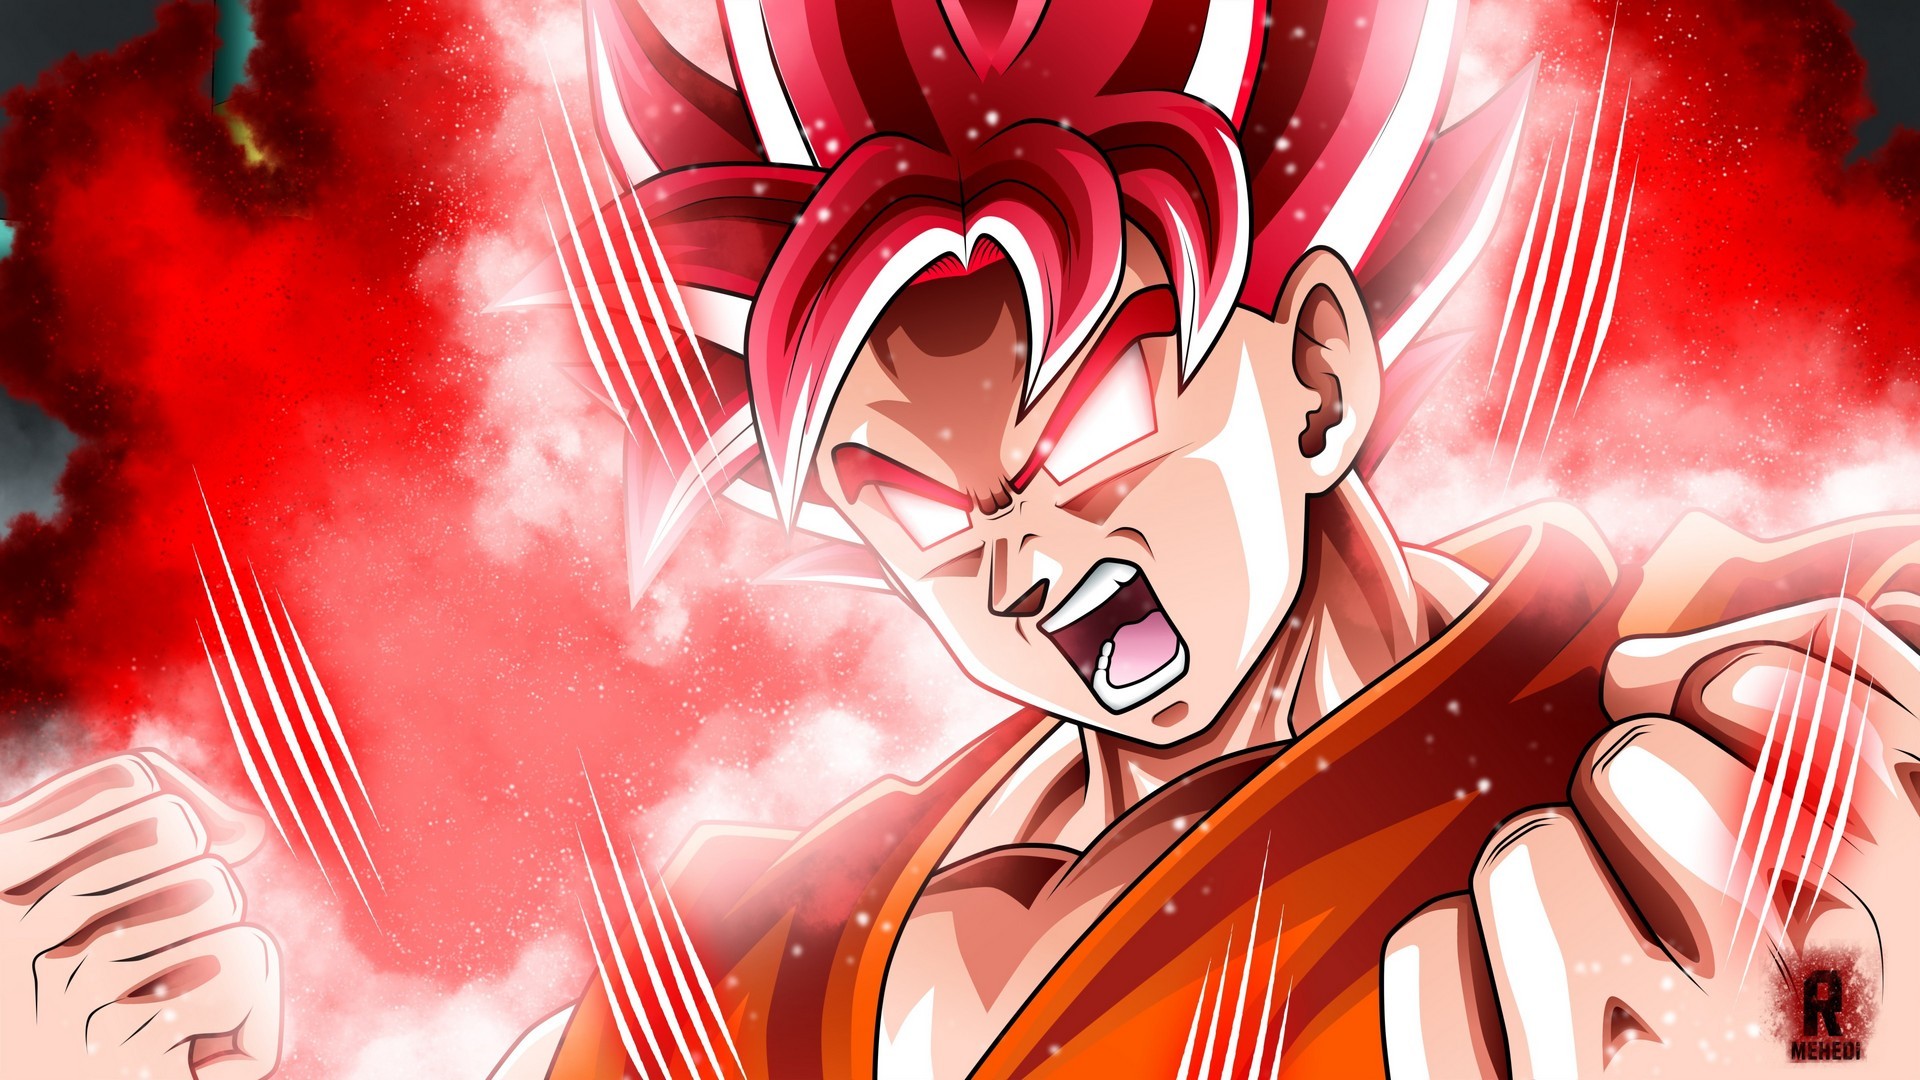 Goku Super Saiyan God Desktop Wallpaper with image resolution 1920x1080 pixel. You can use this wallpaper as background for your desktop Computer Screensavers, Android or iPhone smartphones